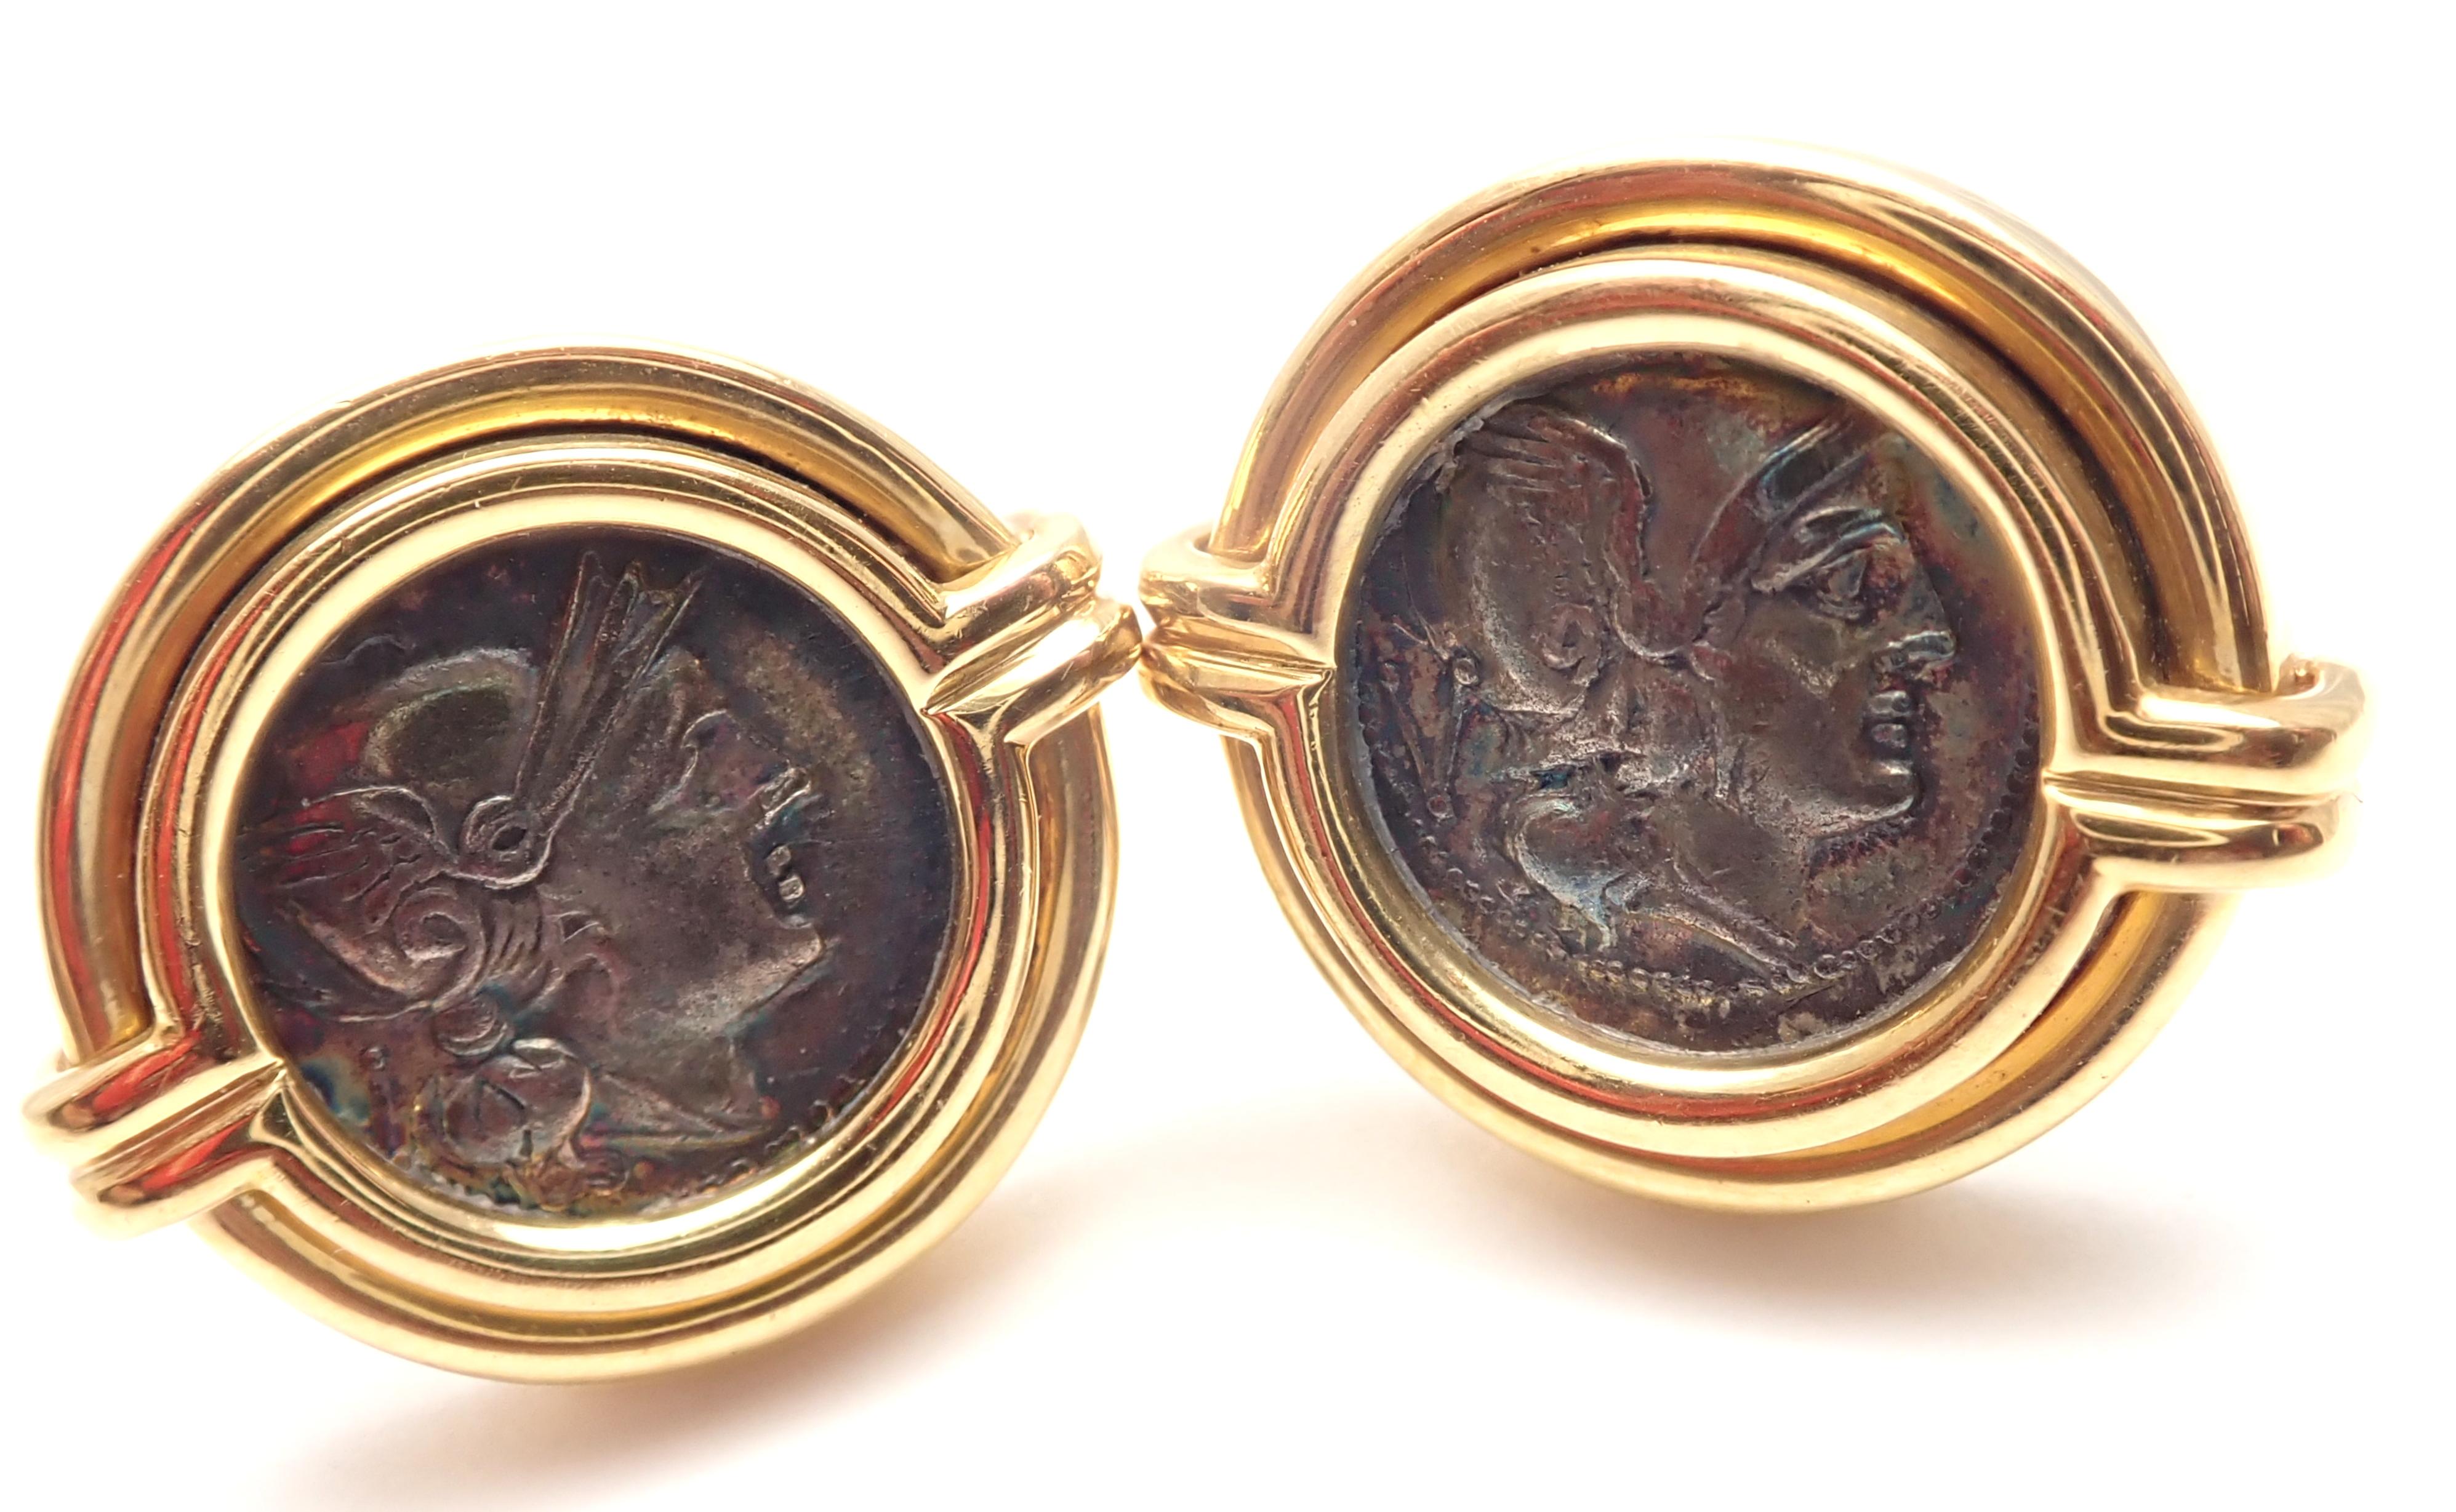 18k Yellow Gold Ancient Coin Cufflinks by Bulgari. 
With 2 coins Roma 205-105 B.C.QVINARIVS
Details:
Measurements: 24mm x 21mm
Weight: 34.9 grams
Stamped Hallmarks: Bvlgari 750 Roma 205-105 B.C.QVINARIVS
*Free Shipping within the United States*
YOUR